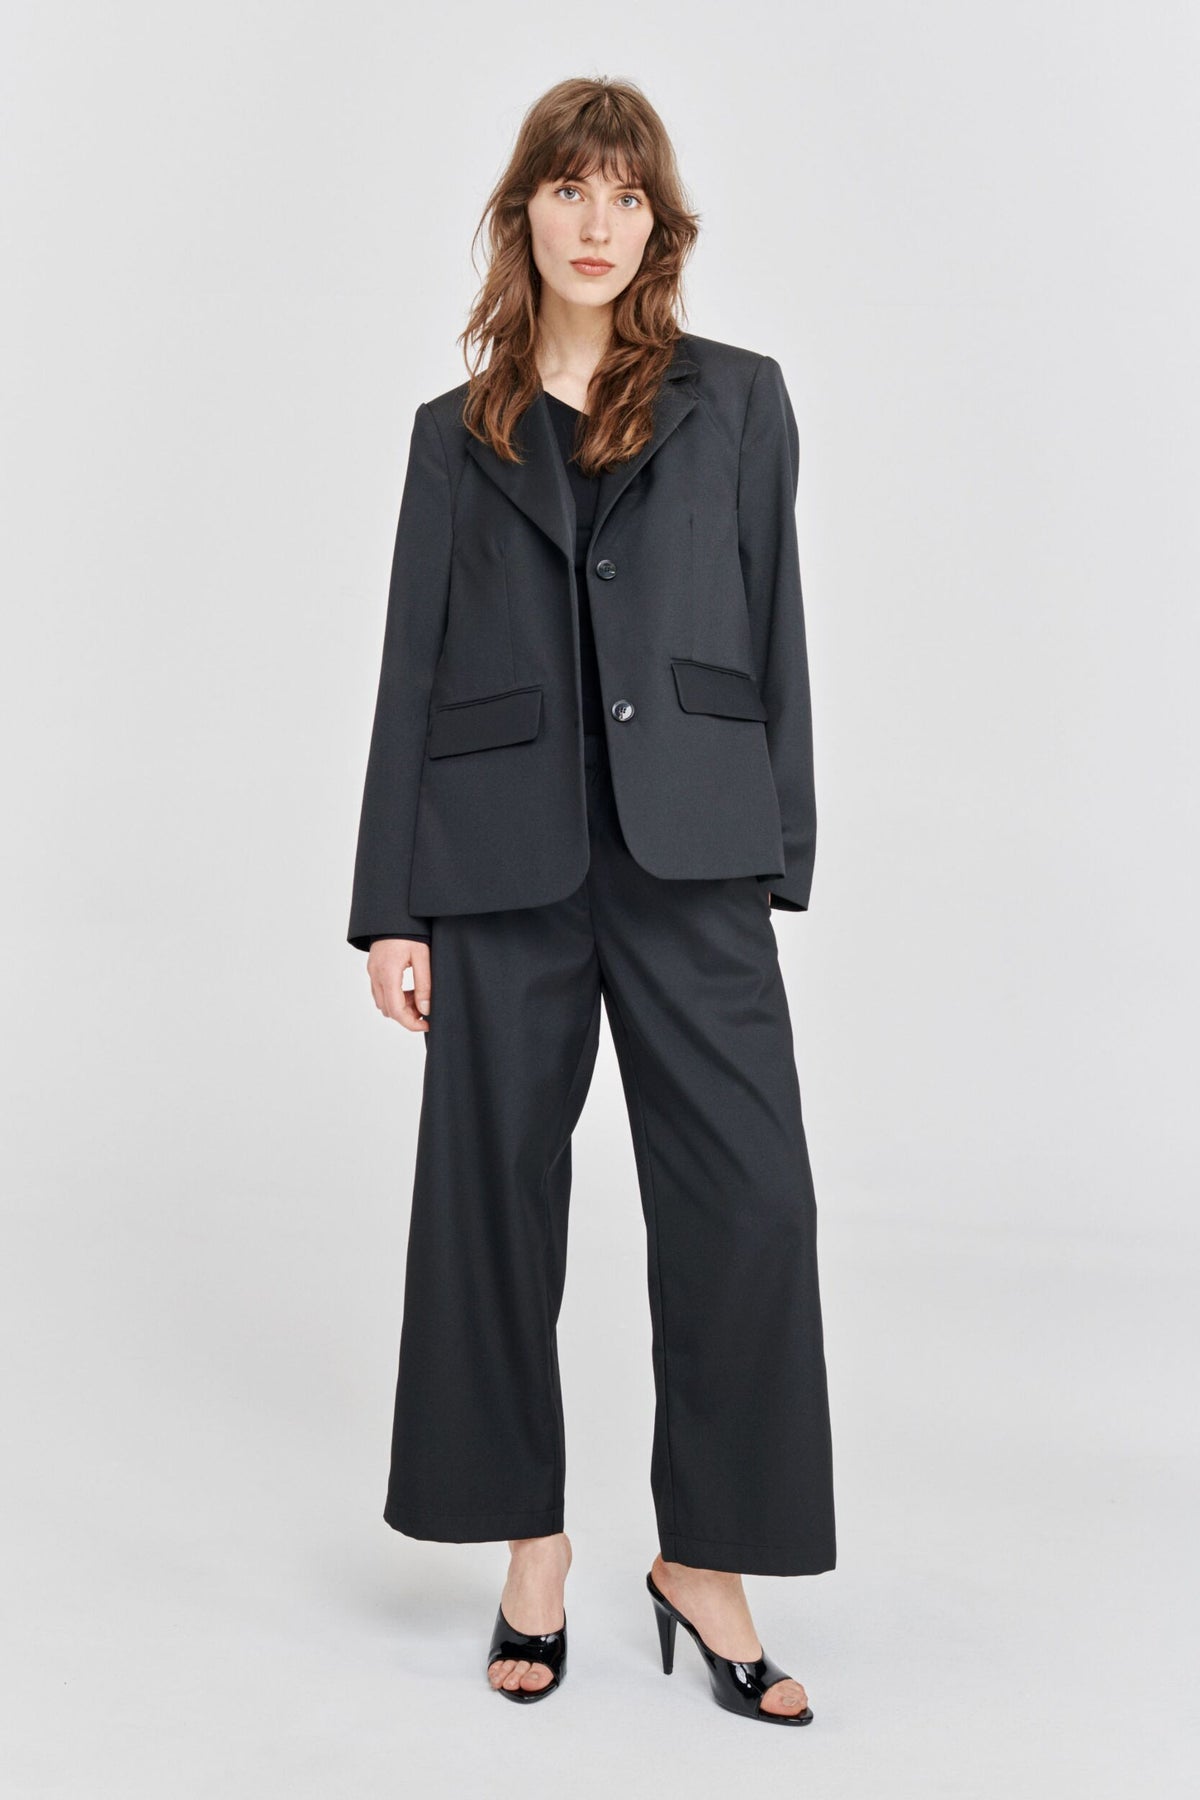 Classic black blazer with single breasted plastic button fastenings fabric tie belt and long side vents